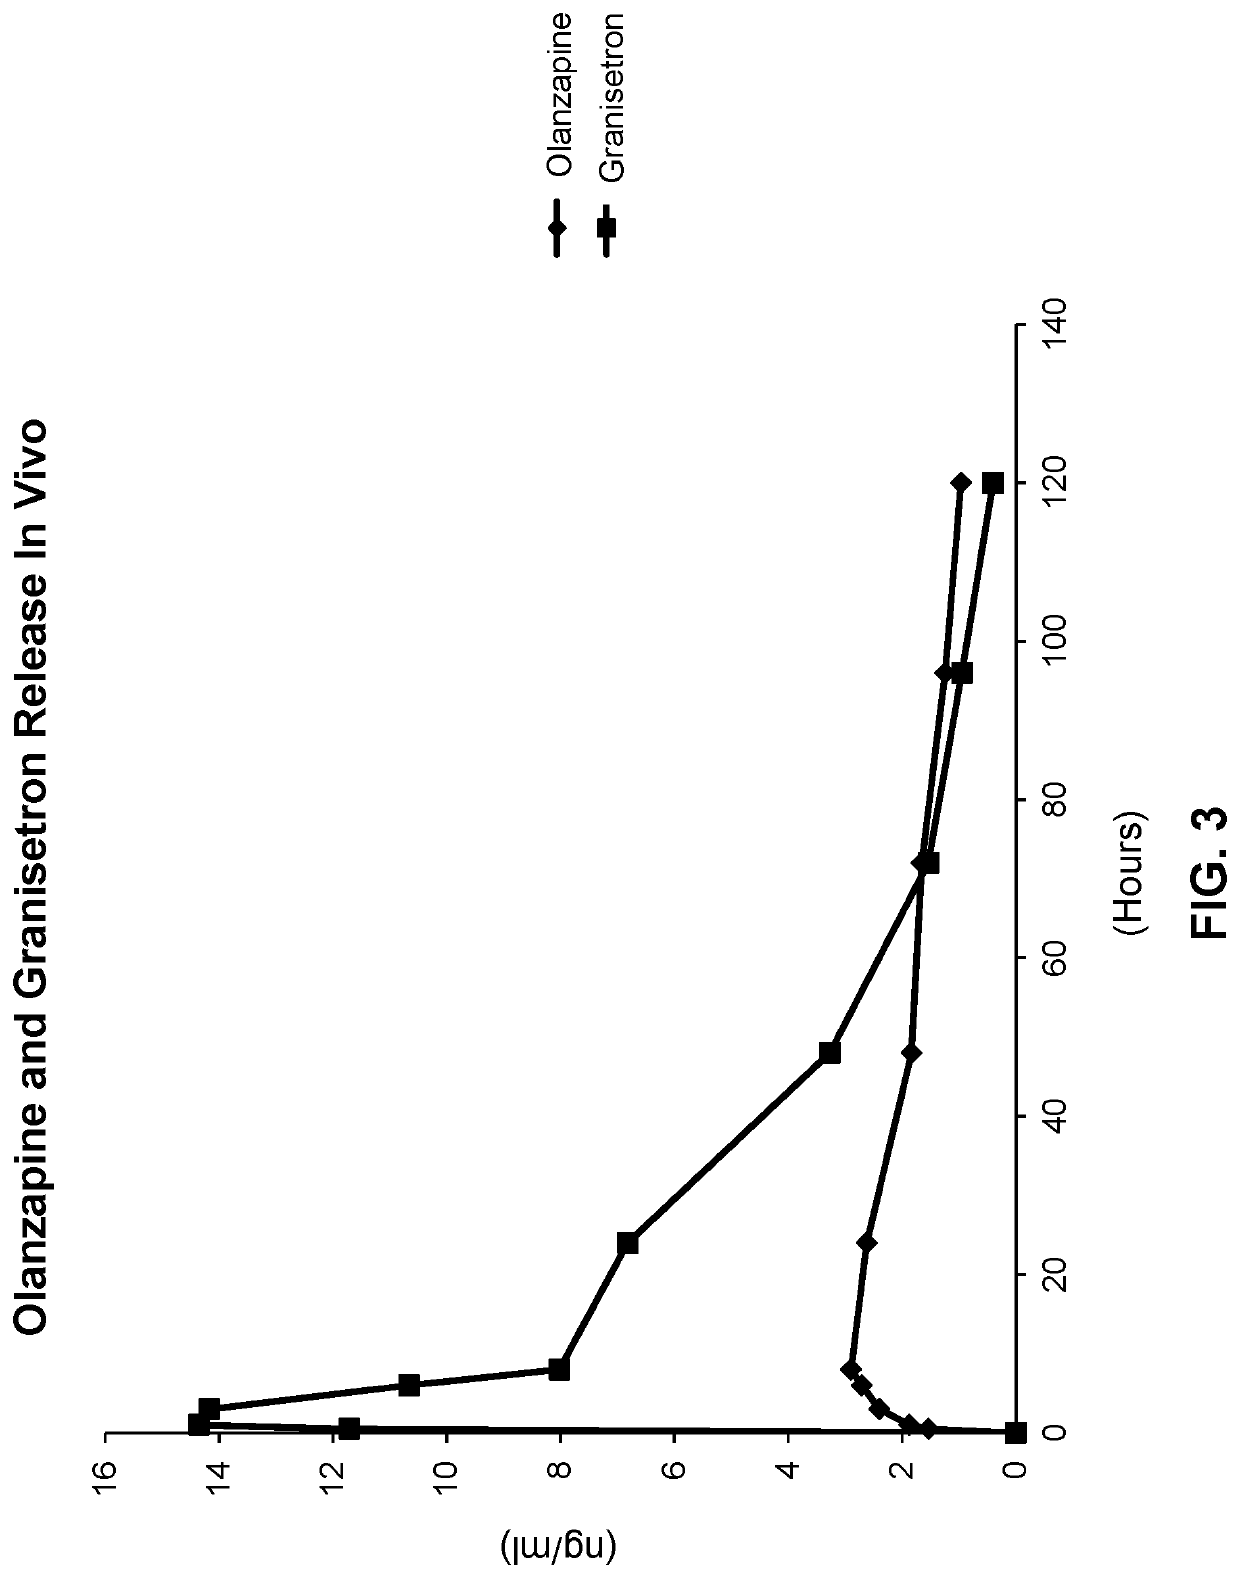 Long-acting polymeric delivery systems comprising olanzapine and a 5-ht3 receptor antagonist